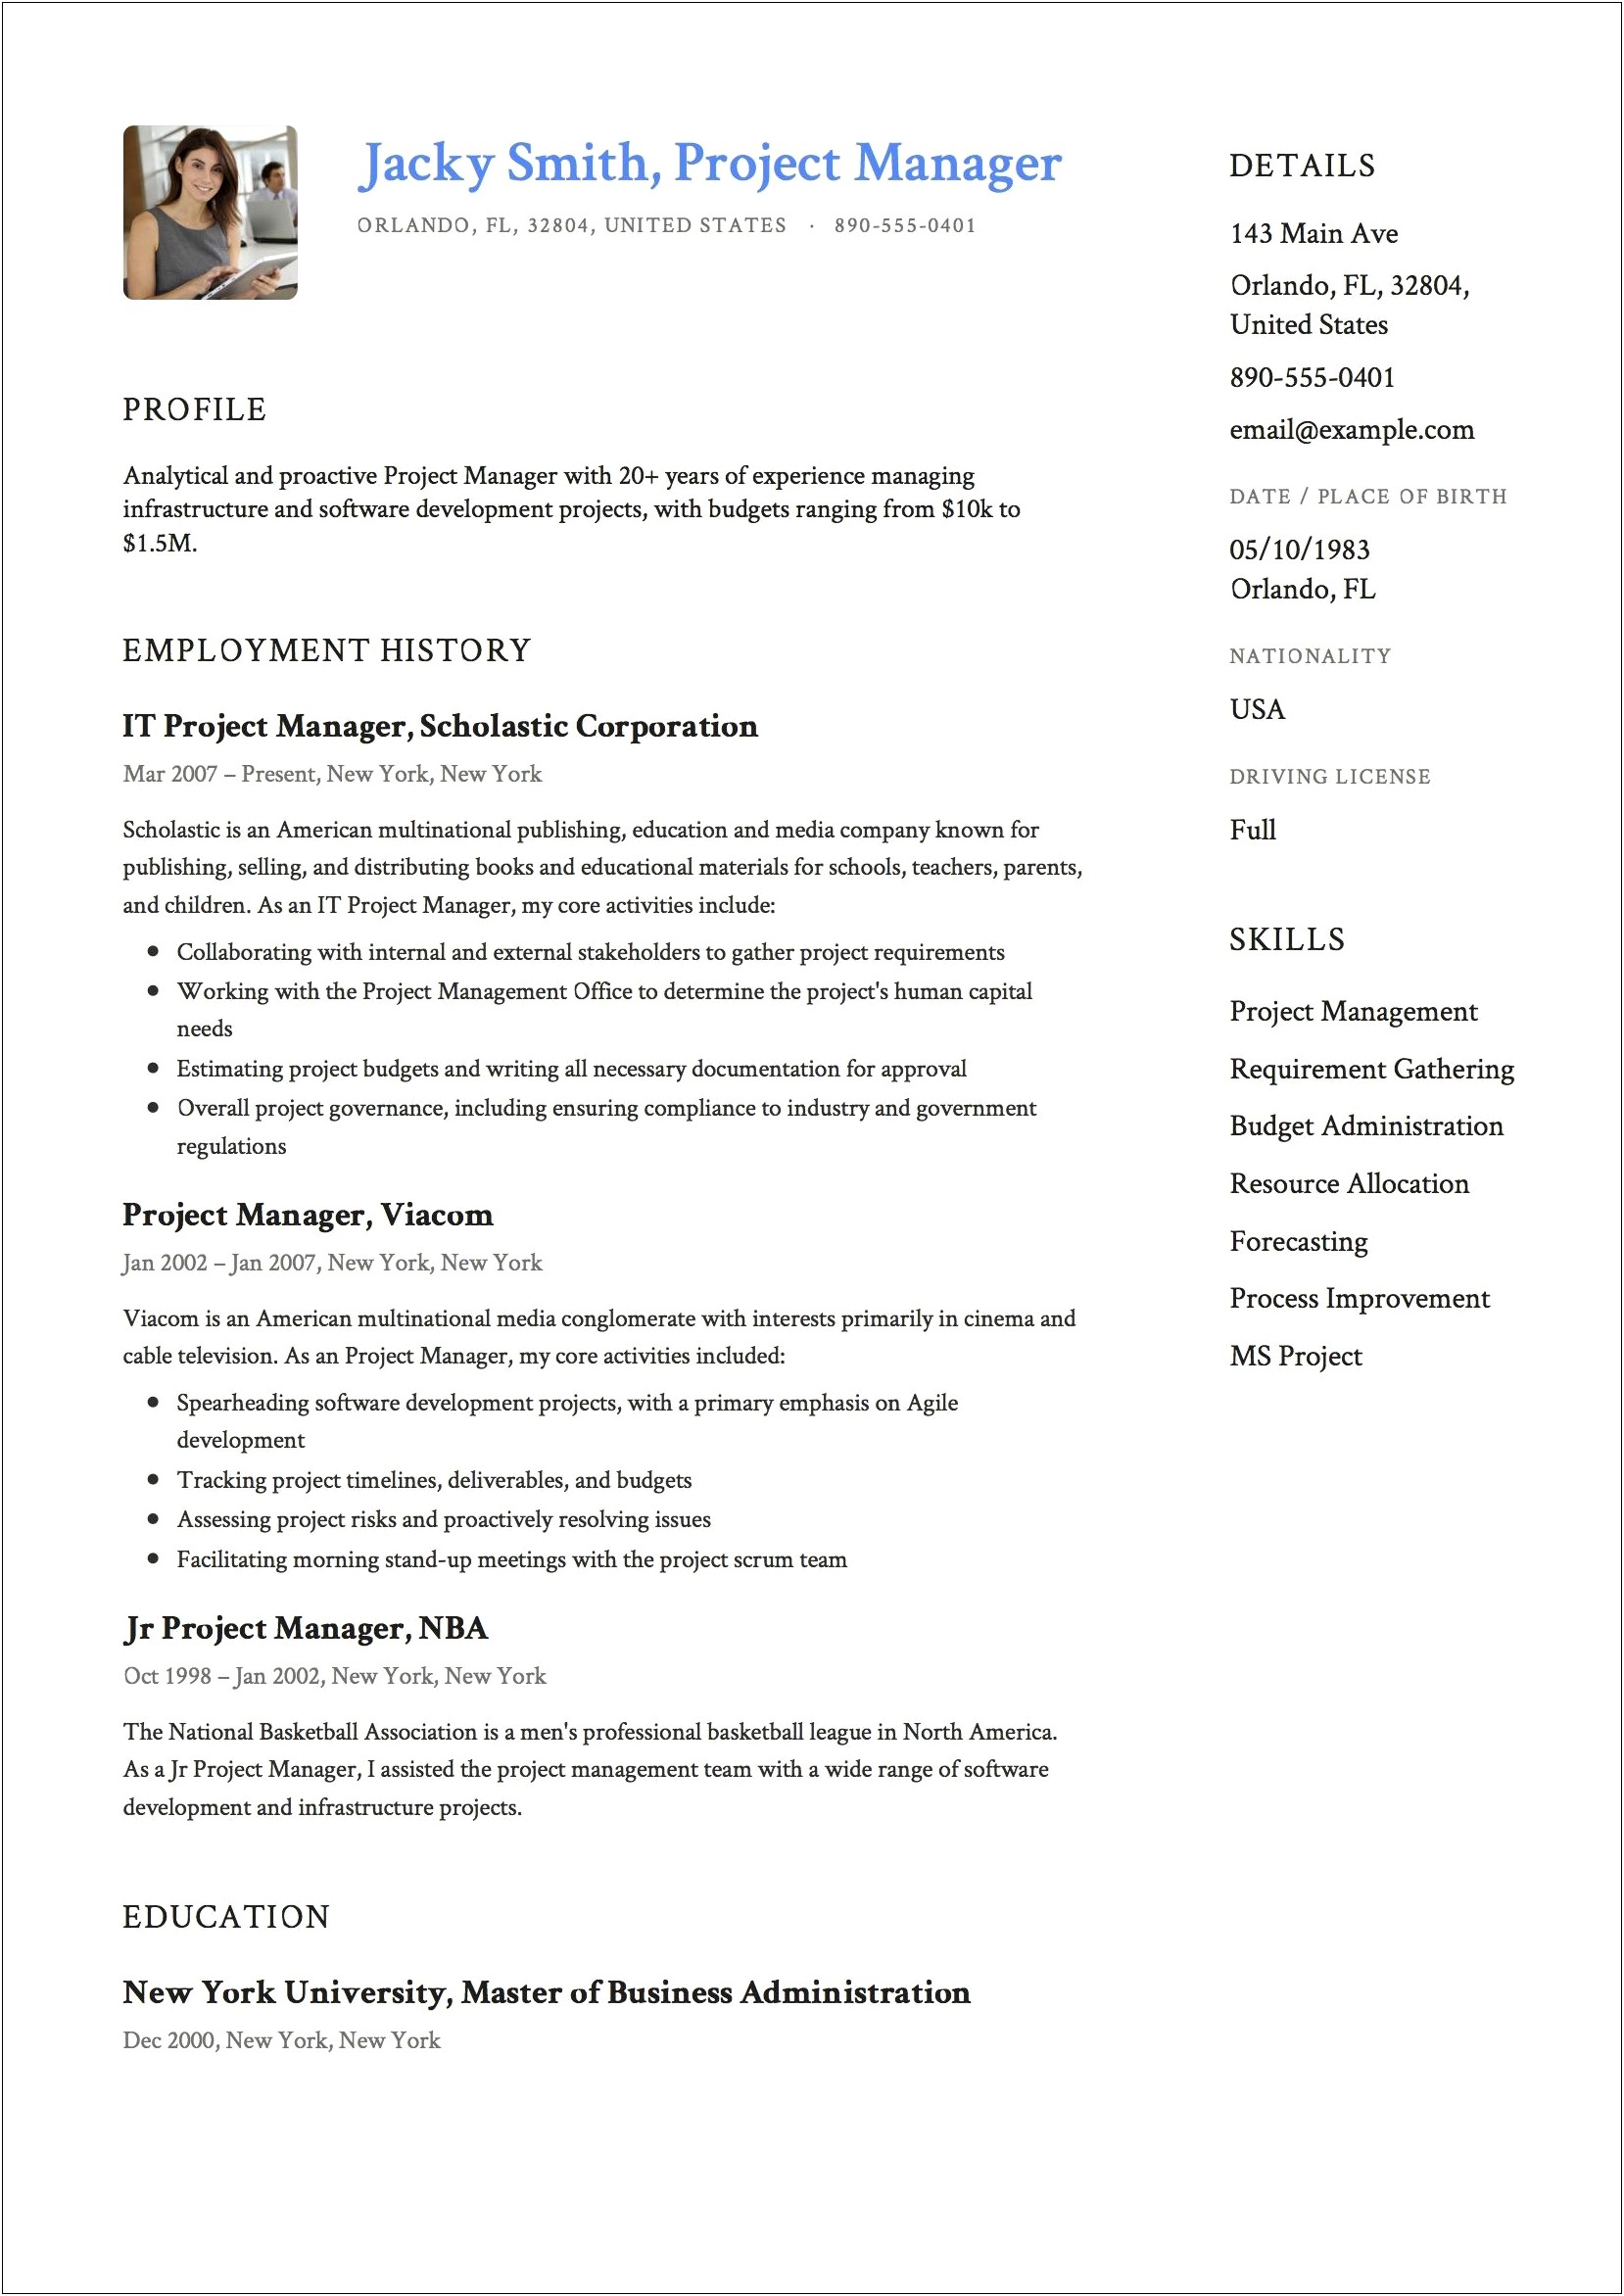 Examples Of Technical Project Manager Resumes